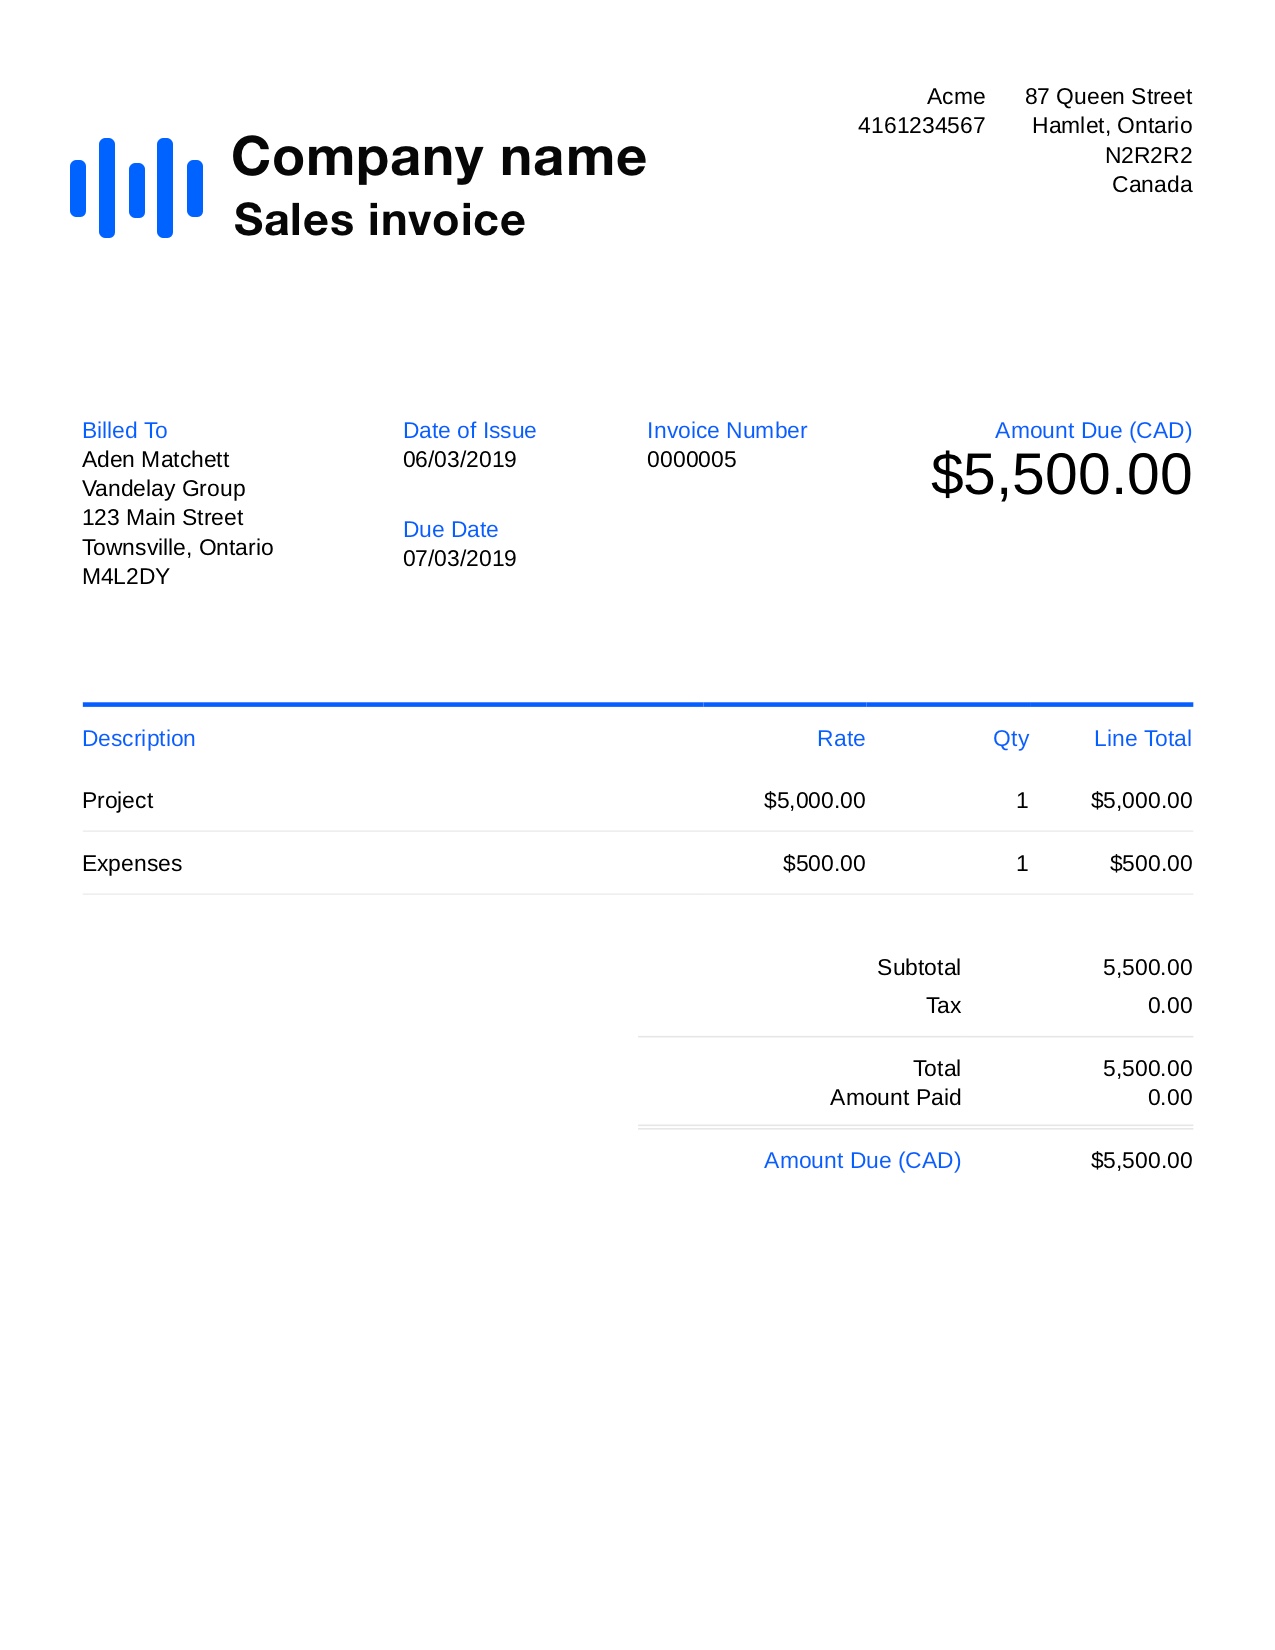 Free Sales Invoice Template Customize And Send In 90 Seconds